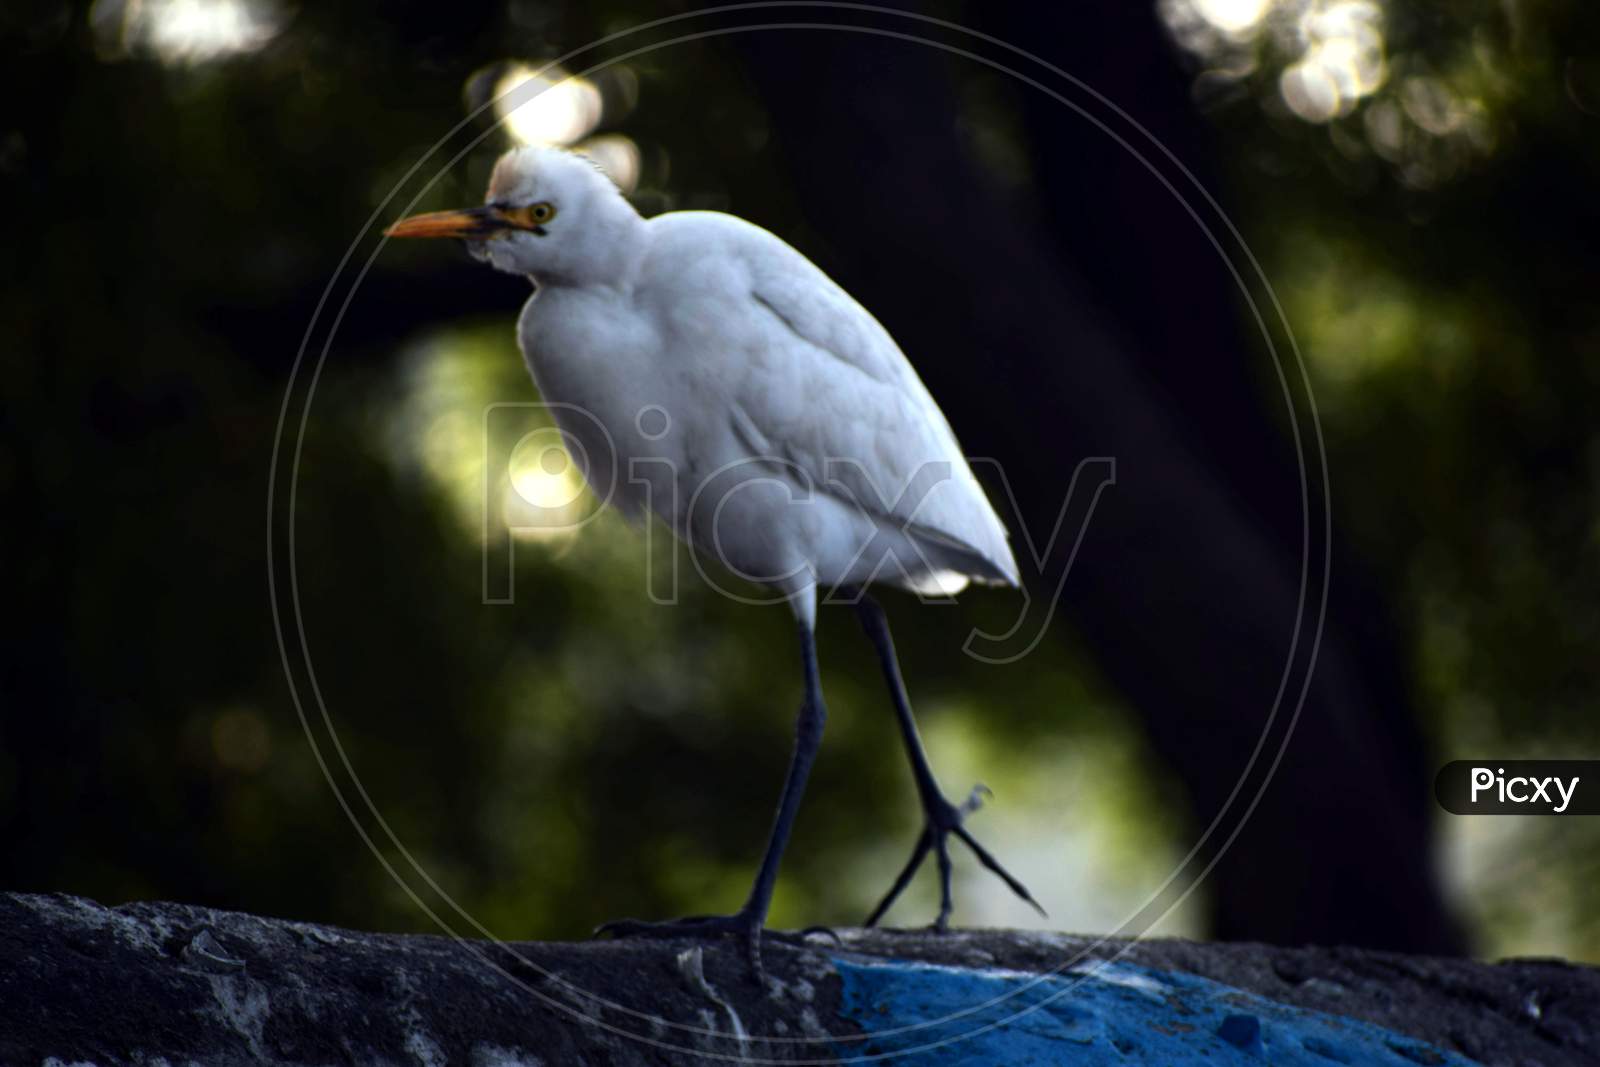 Black Shadow Of A White Bird On A Wall. Background Blur